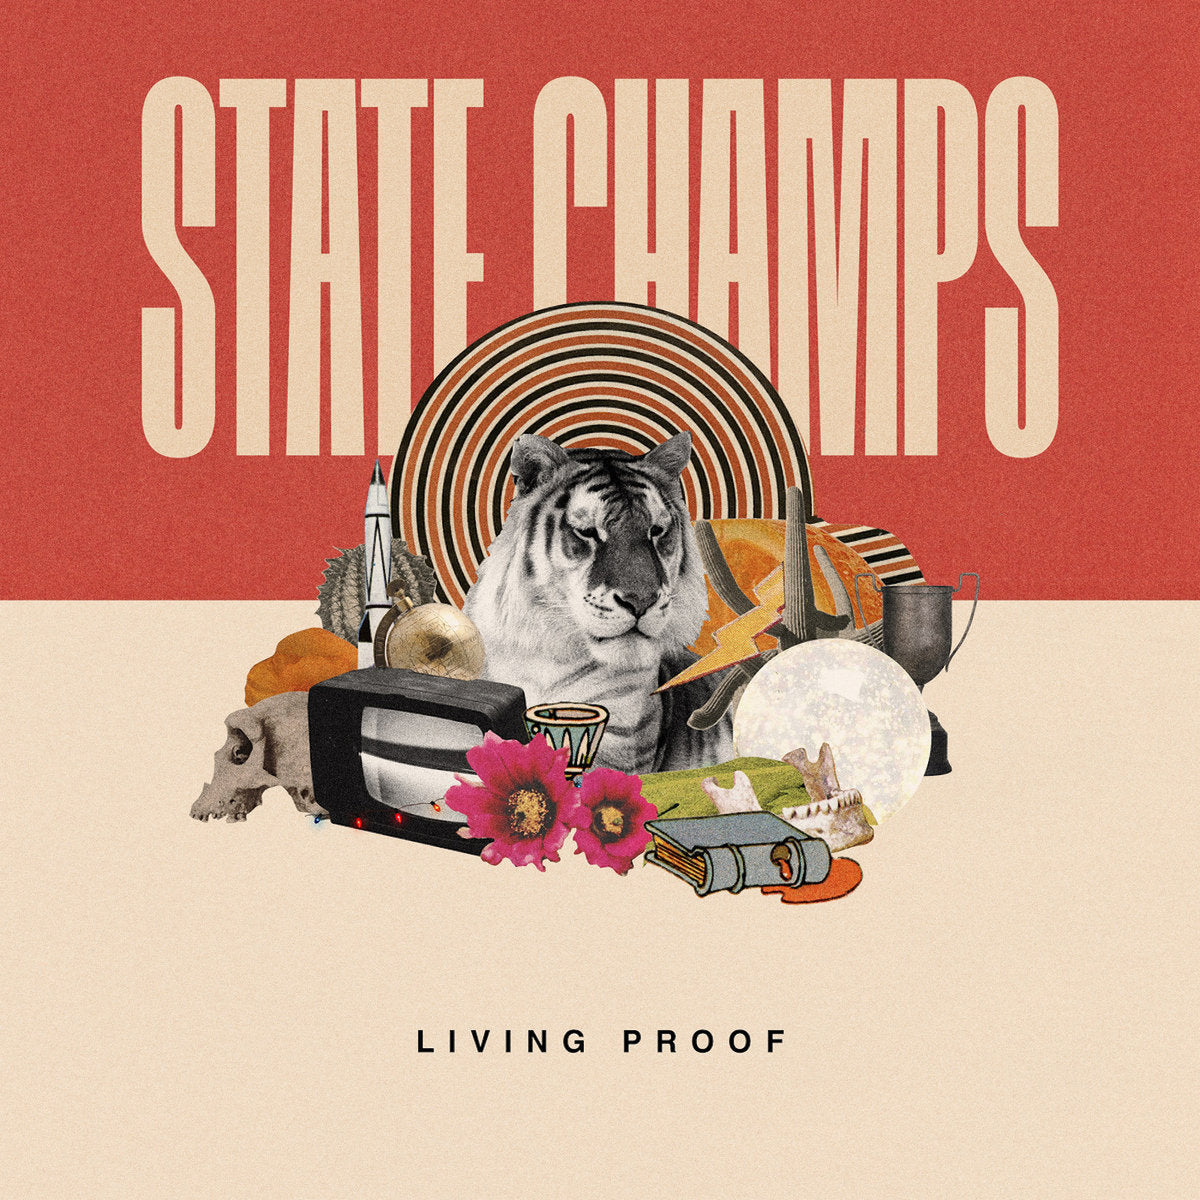 State Champs "Living Proof" CD